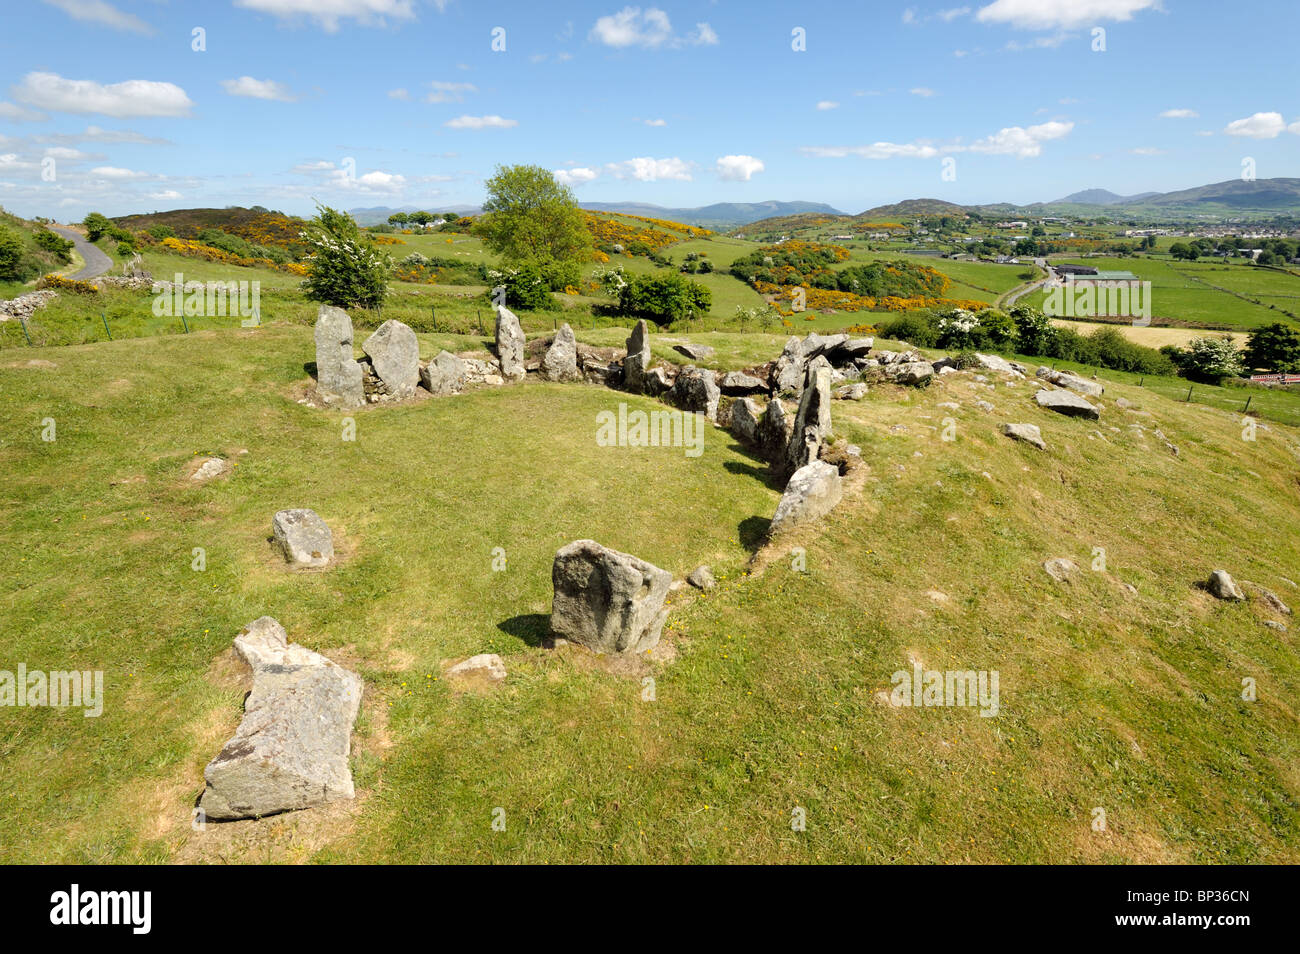 Ballymacdermot prehistoric Neolithic chambered court cairn burial site near Newry, County Armagh, Northern Ireland, UK Stock Photo